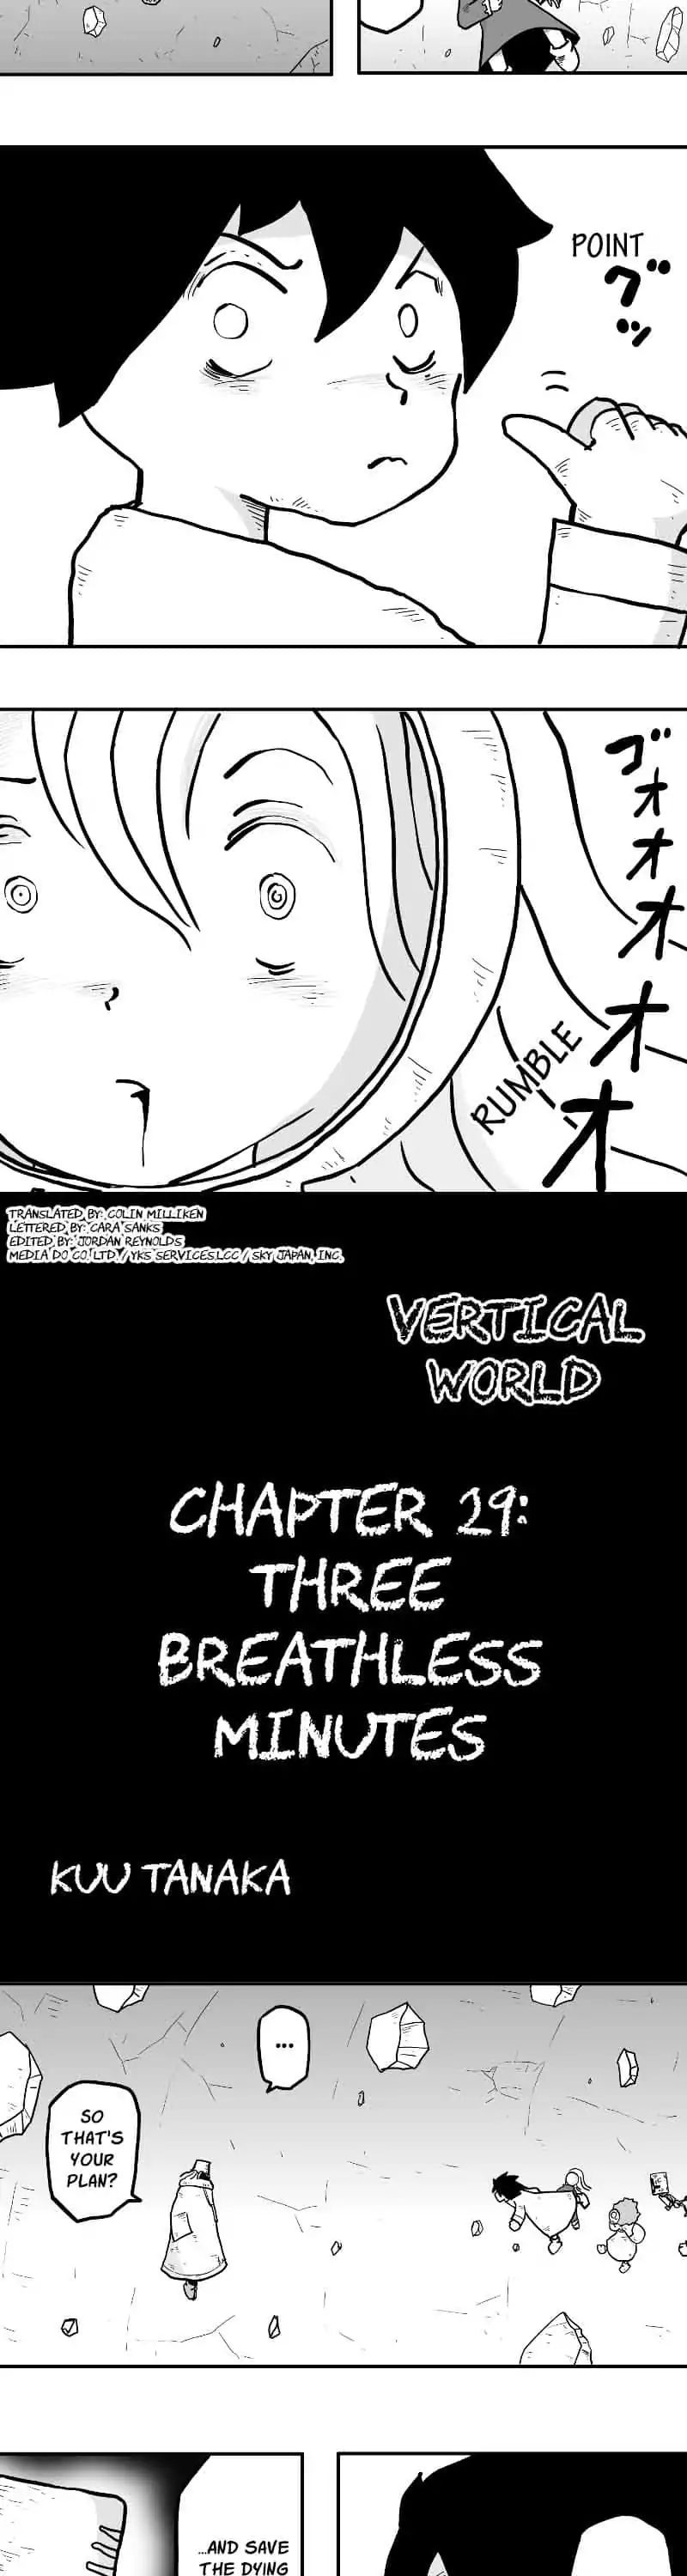 The Vertical Country Chapter 29 #2